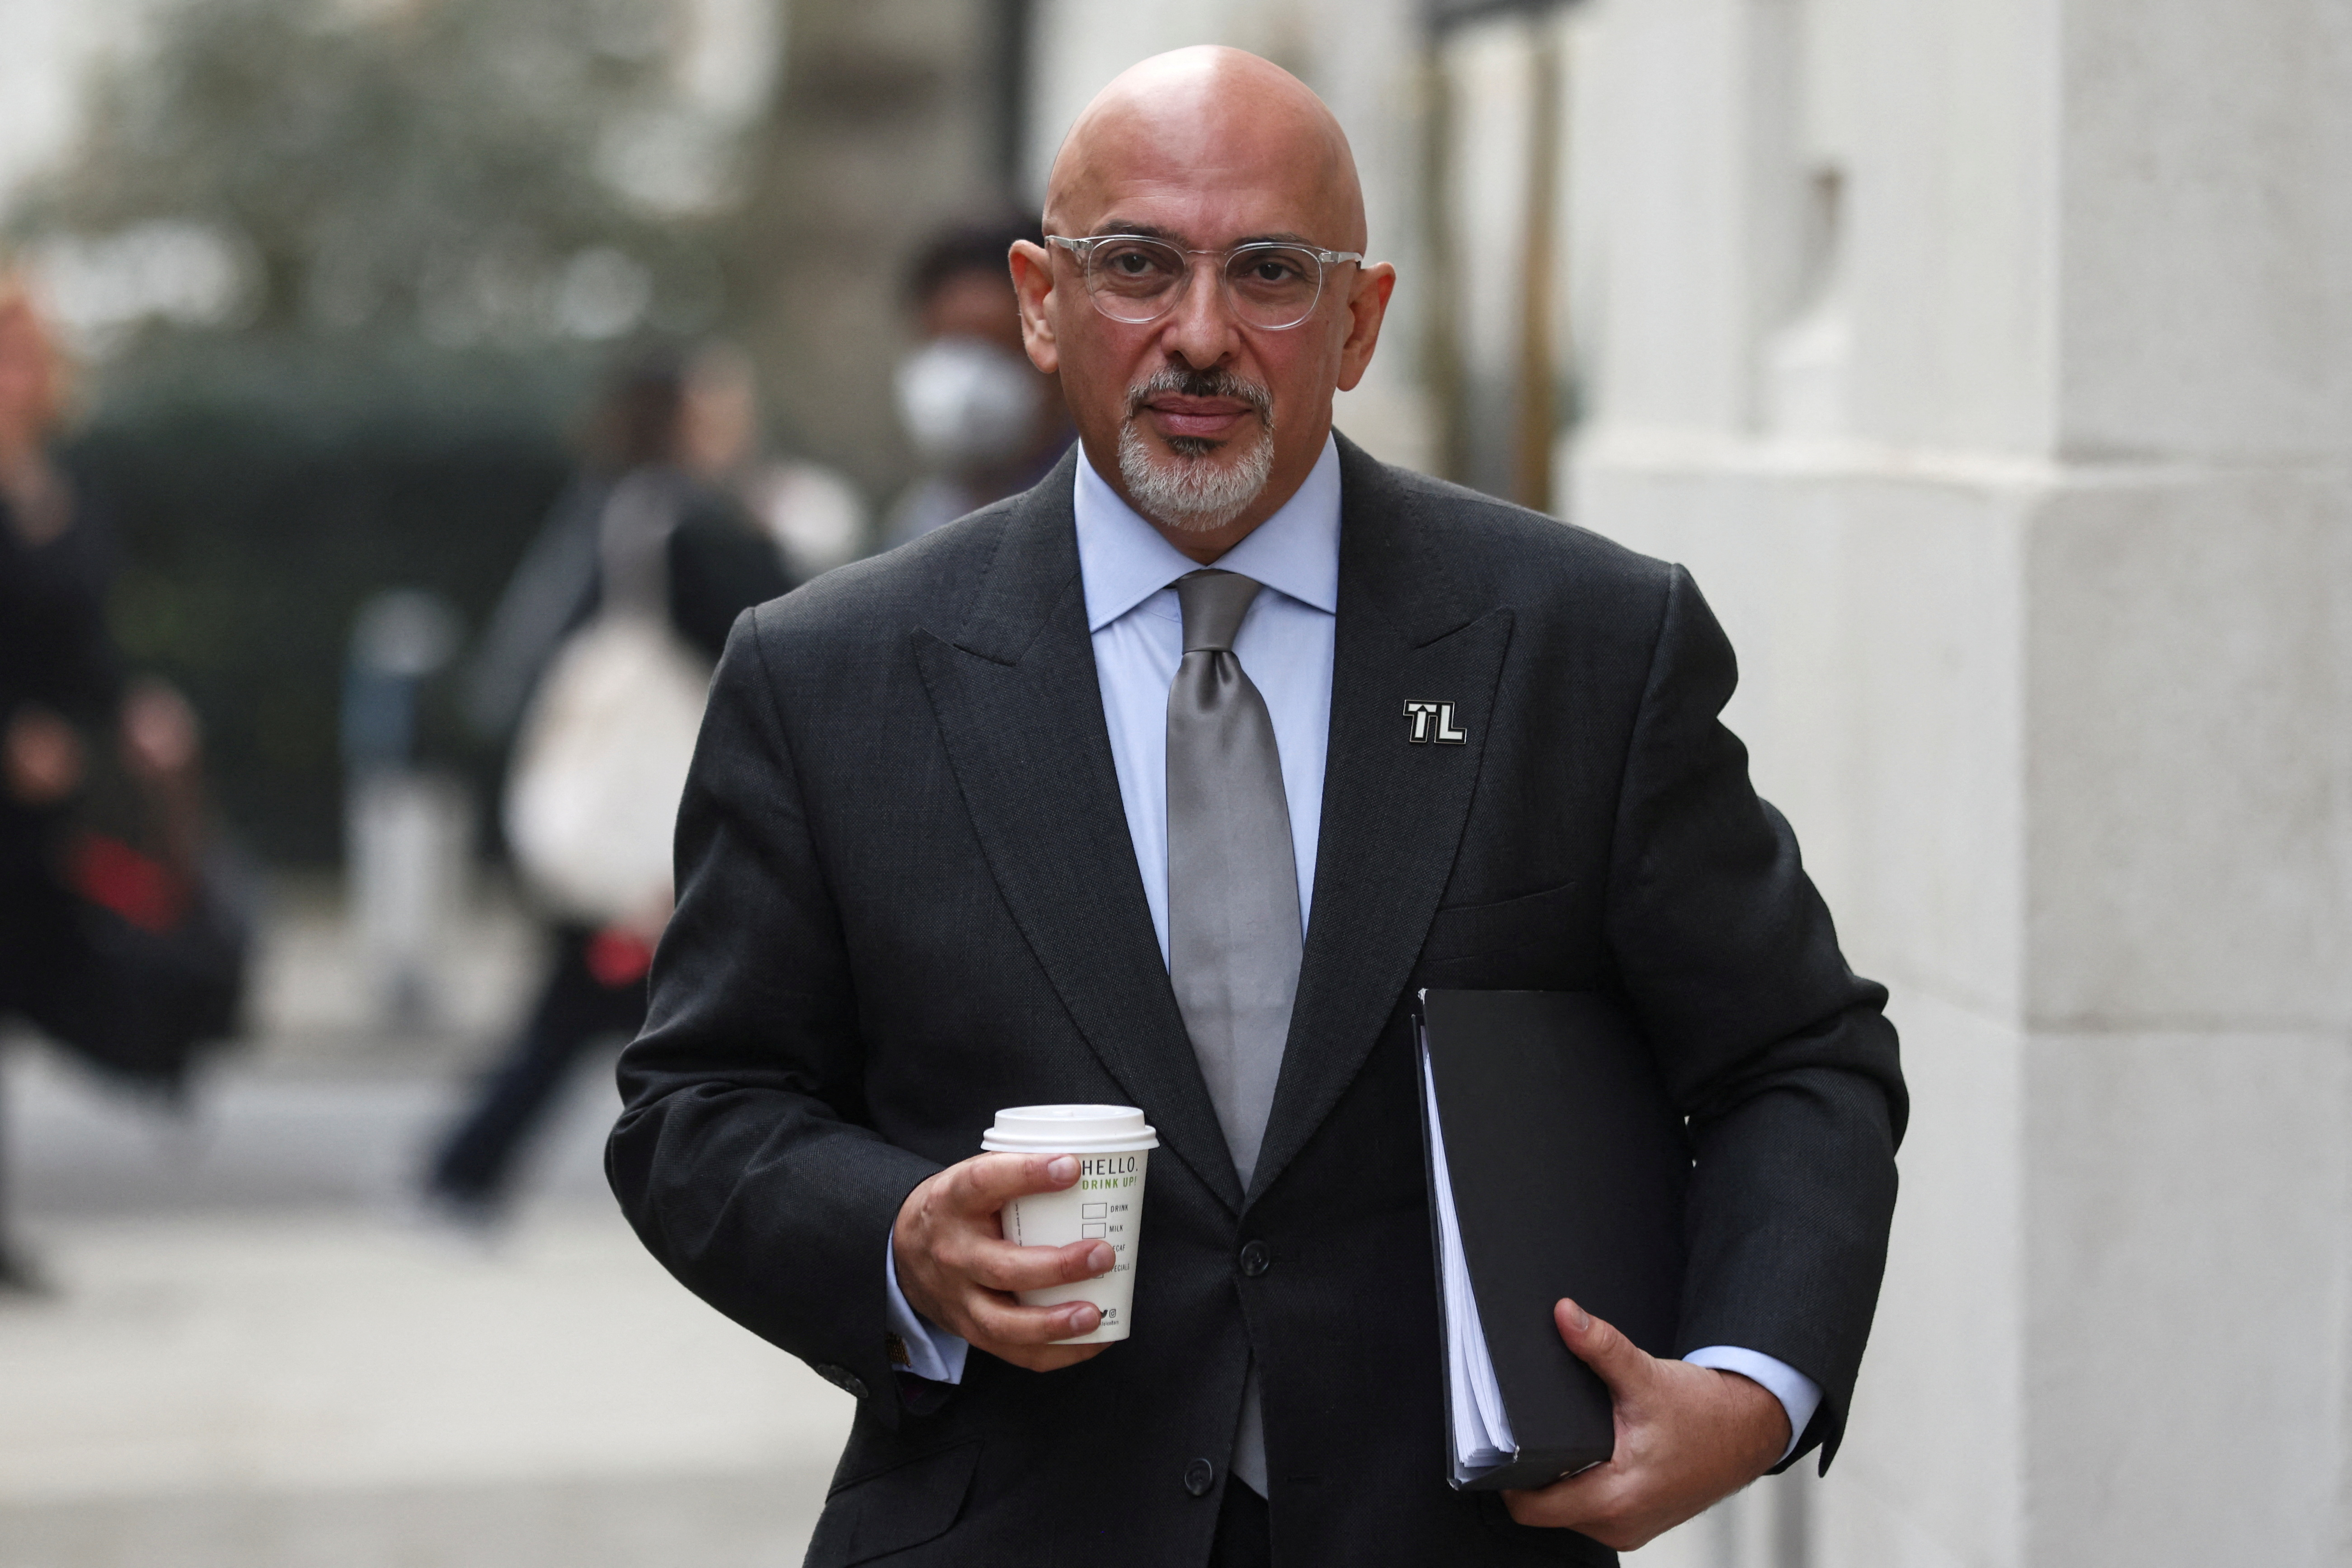 British Education Secretary Nadhim Zahawi leaves after media interview in London